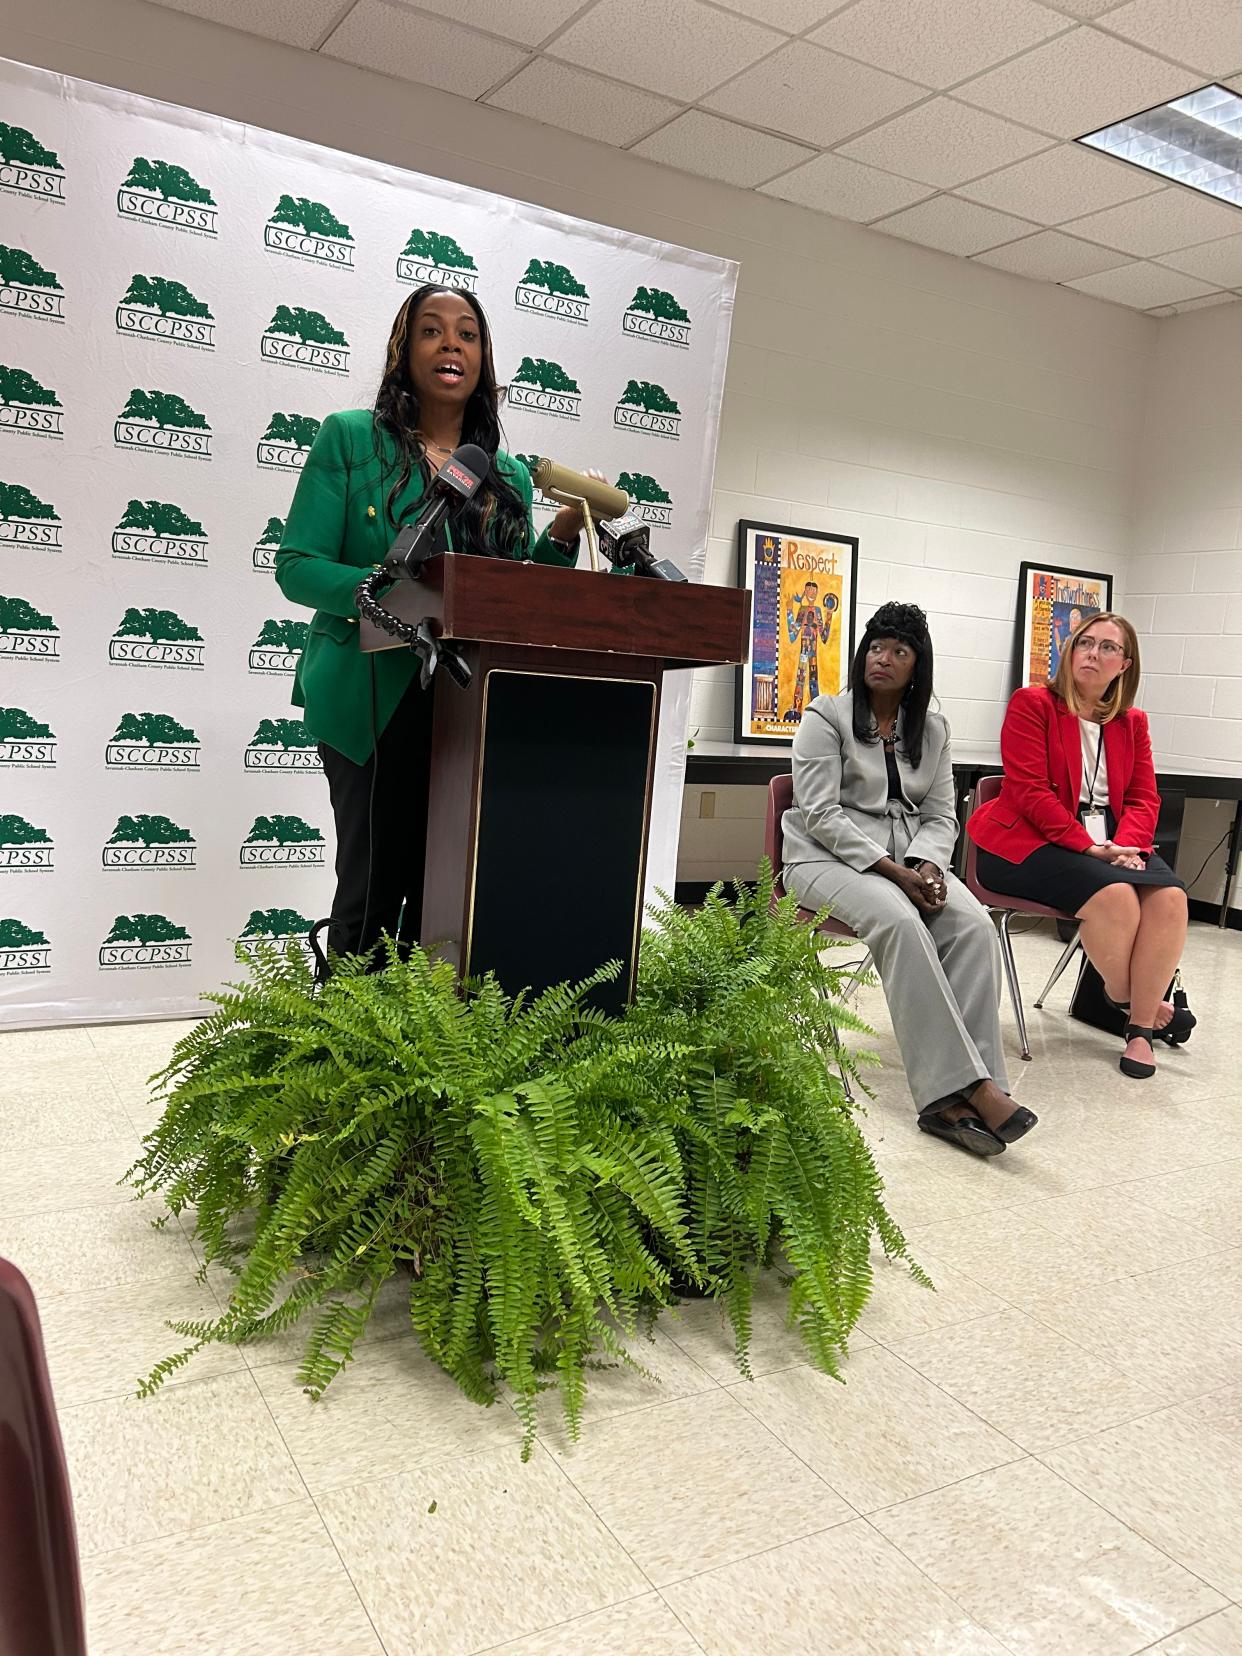 SCCPSS Director of Student Affairs, Quentina Miller-Fields (seated left) and Juvenile Court Judge Lindretta Grindle Kramer (seated right) listen as SCCPSS Superintendent, Denise Watts speaks at a press conference on Wednesday Sept. 20, 2023